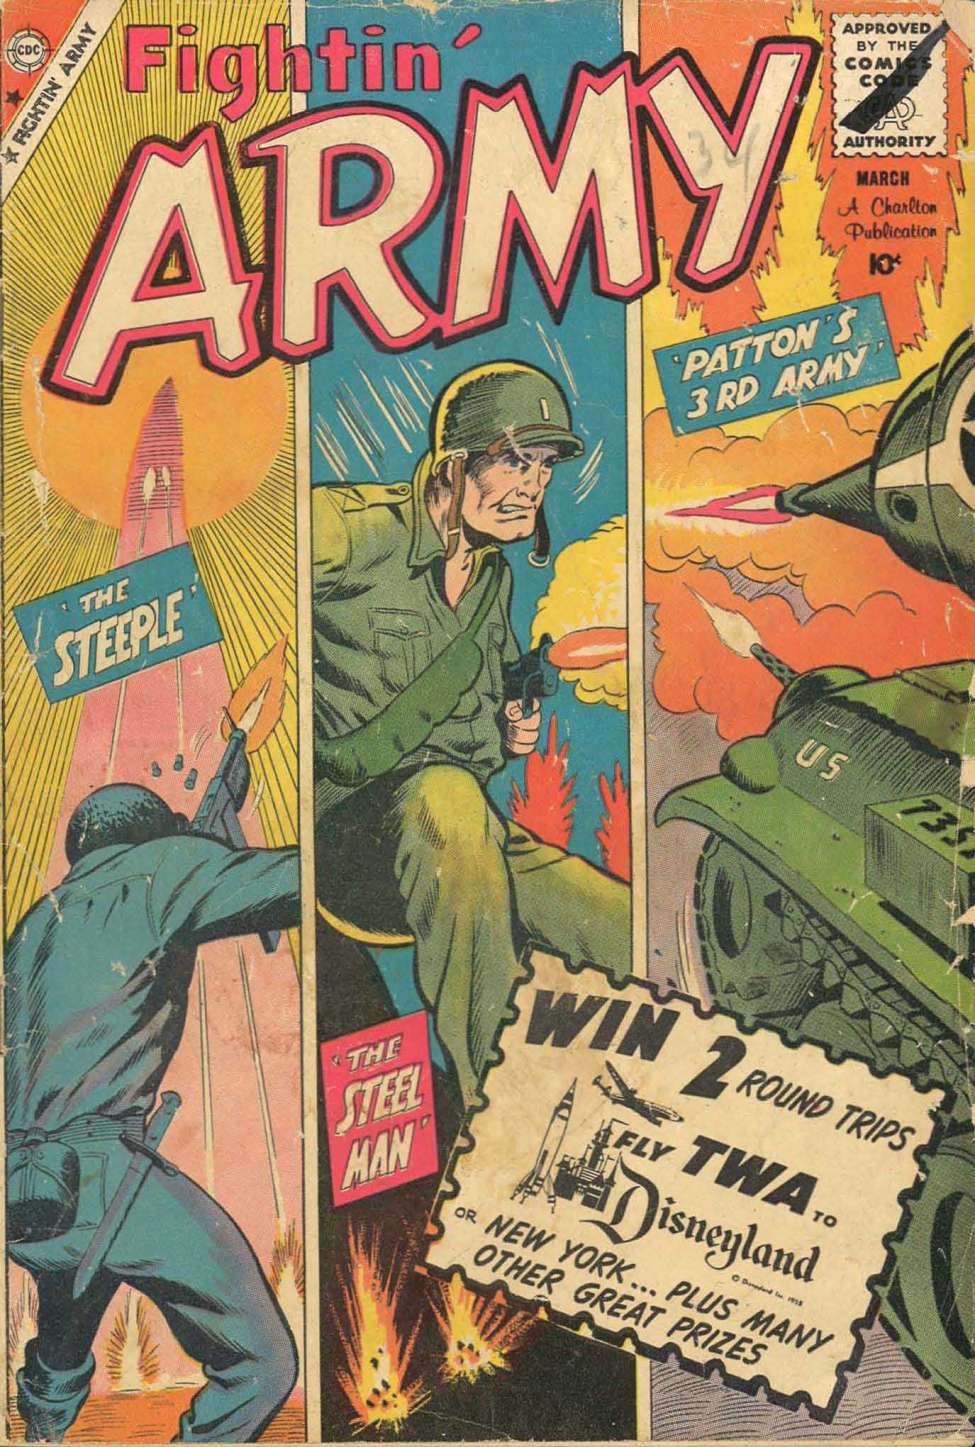 Book Cover For Fightin' Army 34